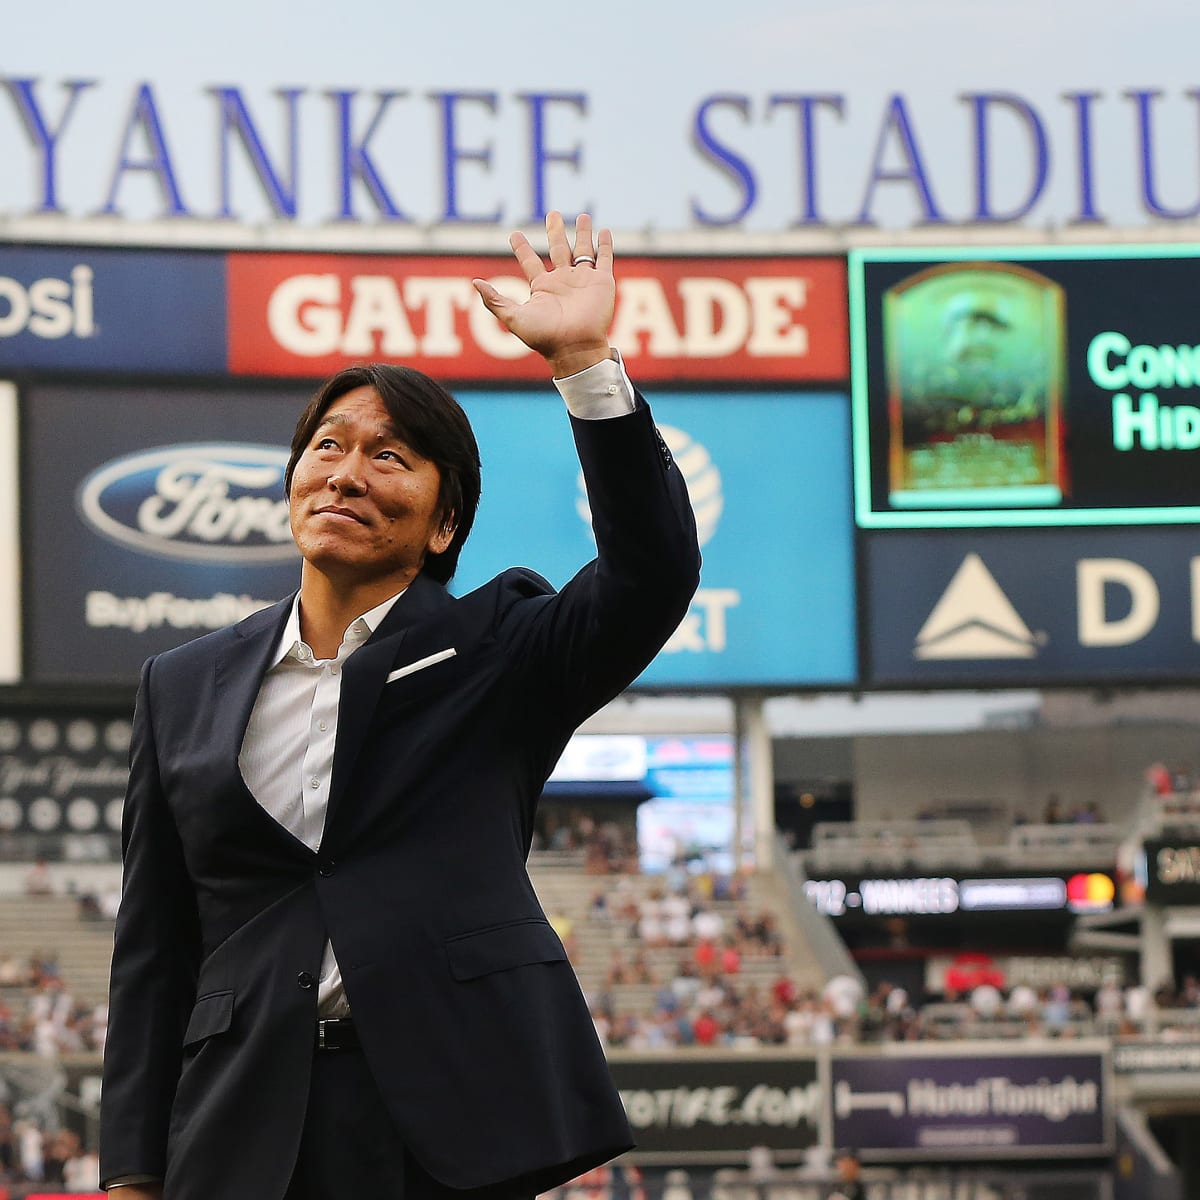 Hideki Matsui re-signs with Yankees, then retires - Sports Illustrated